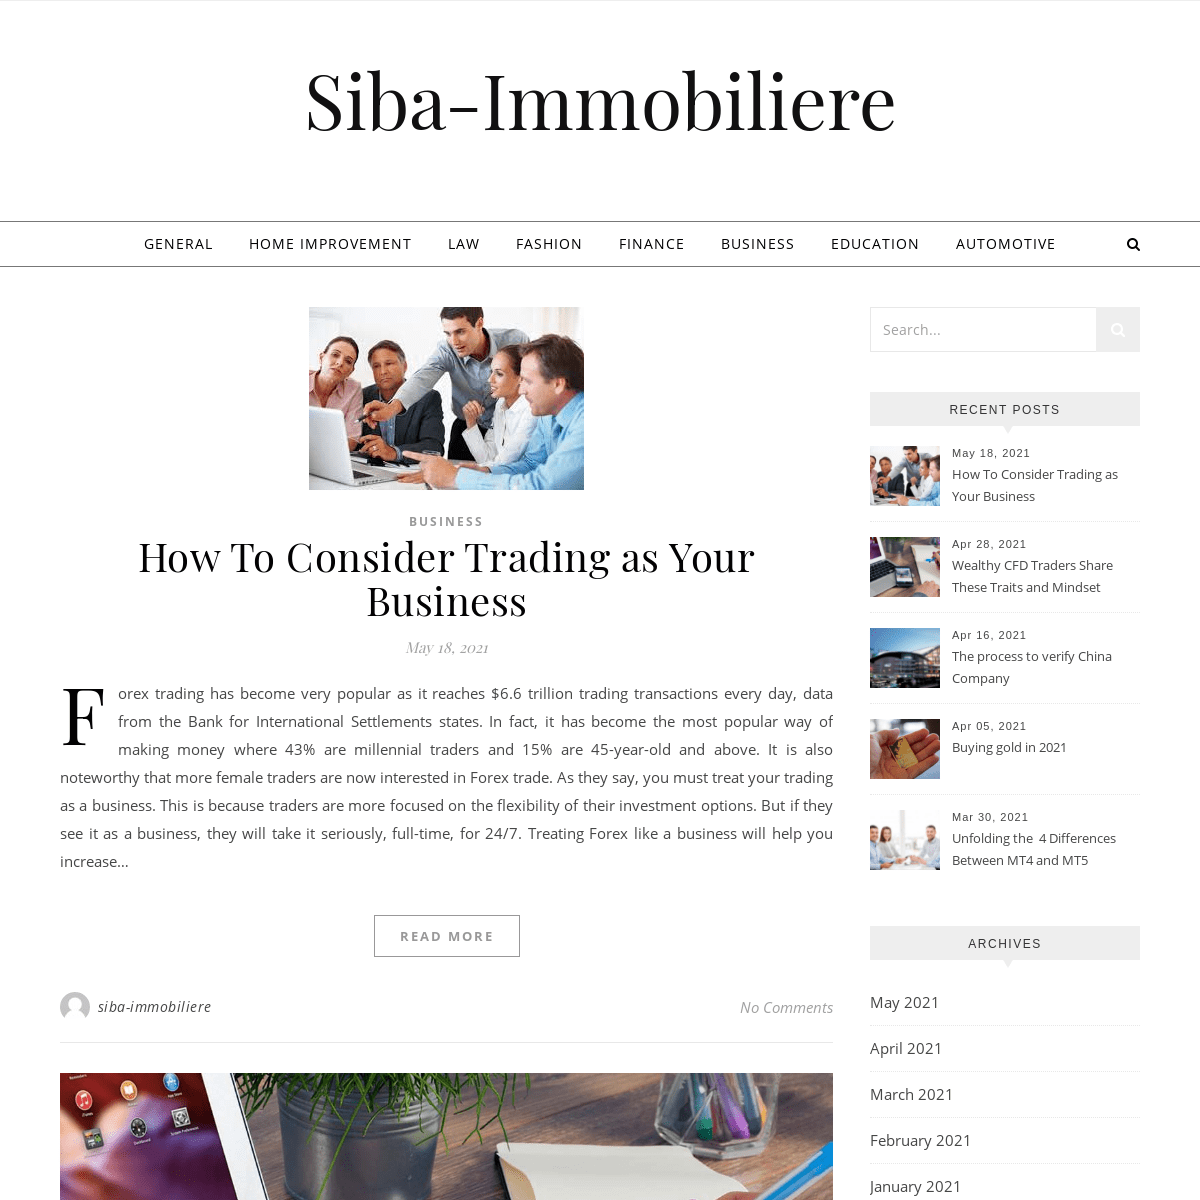 A complete backup of http://siba-immobiliere.com/